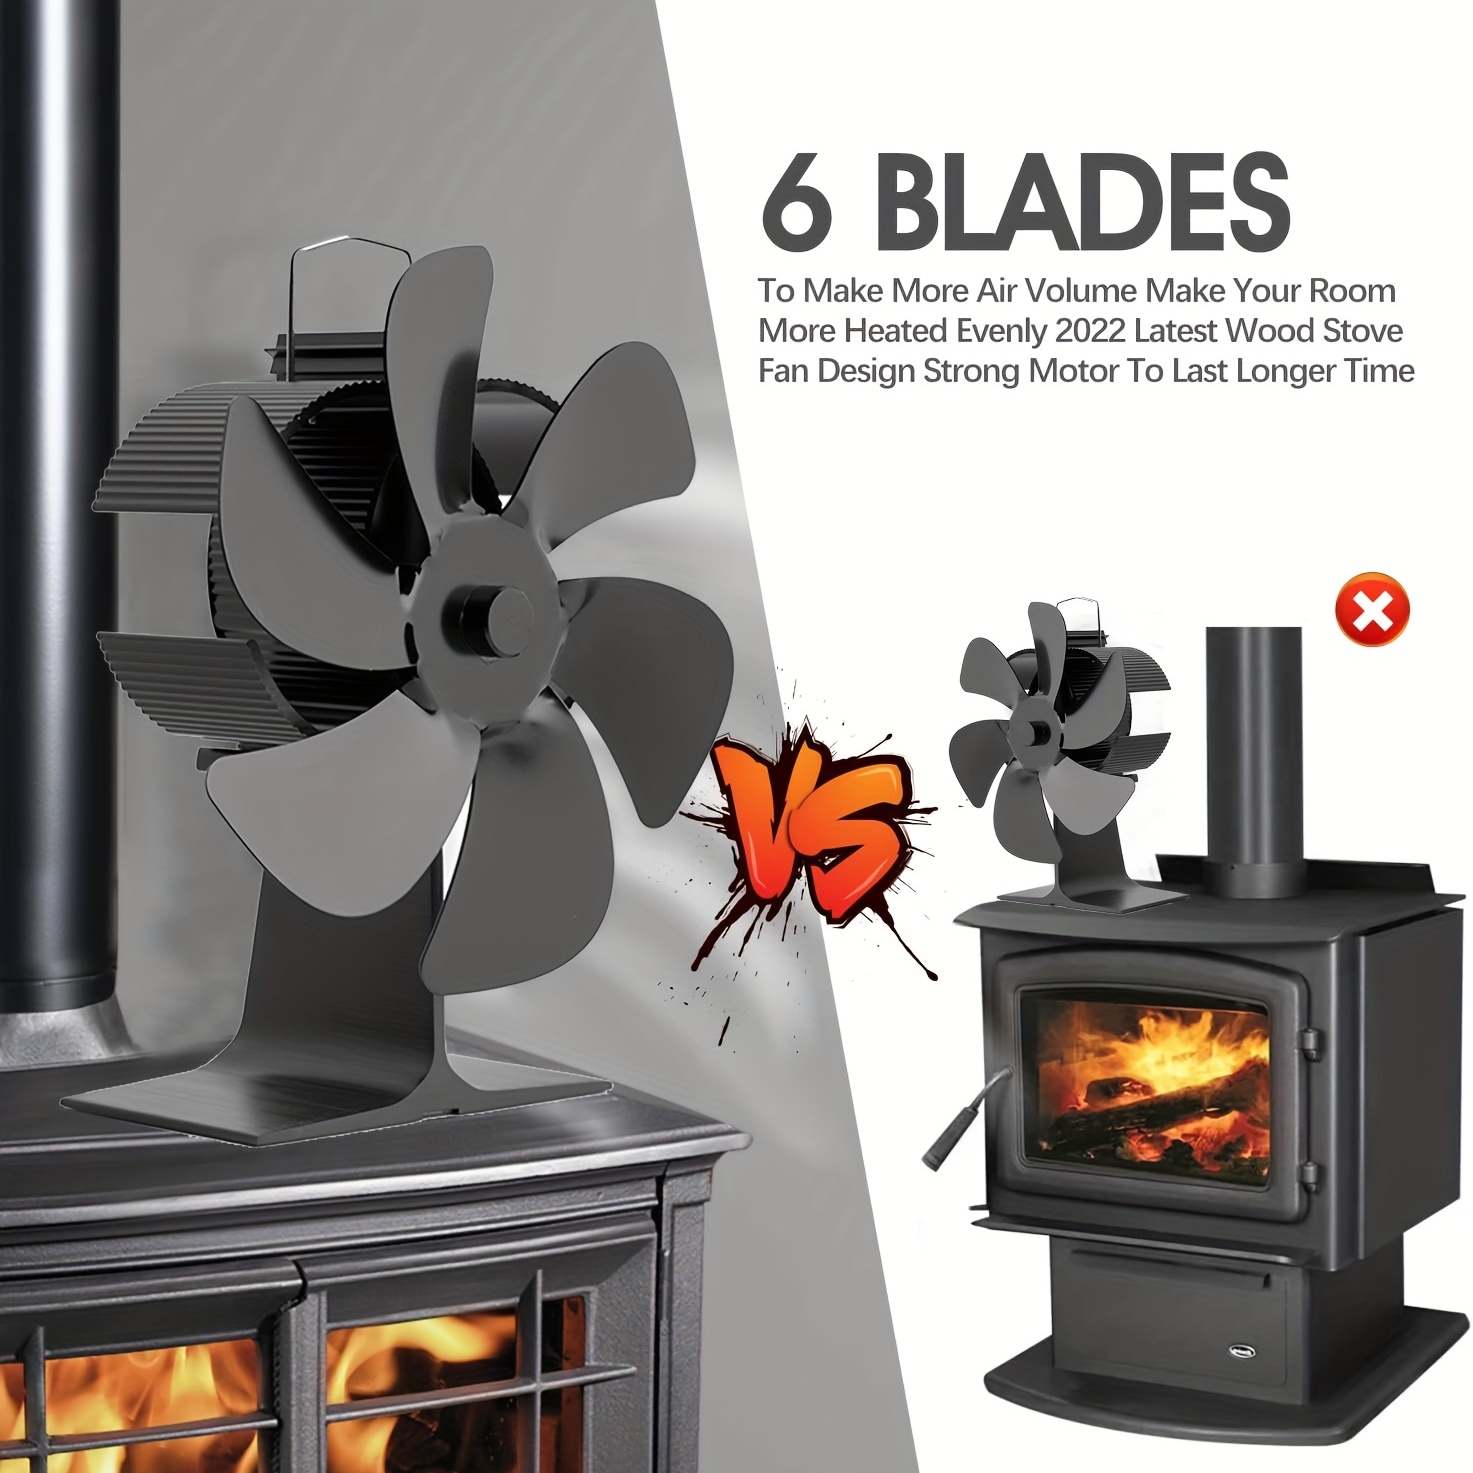 Stove Fans Heat Powered Fireplace Fan For Warm Air Wood Stove